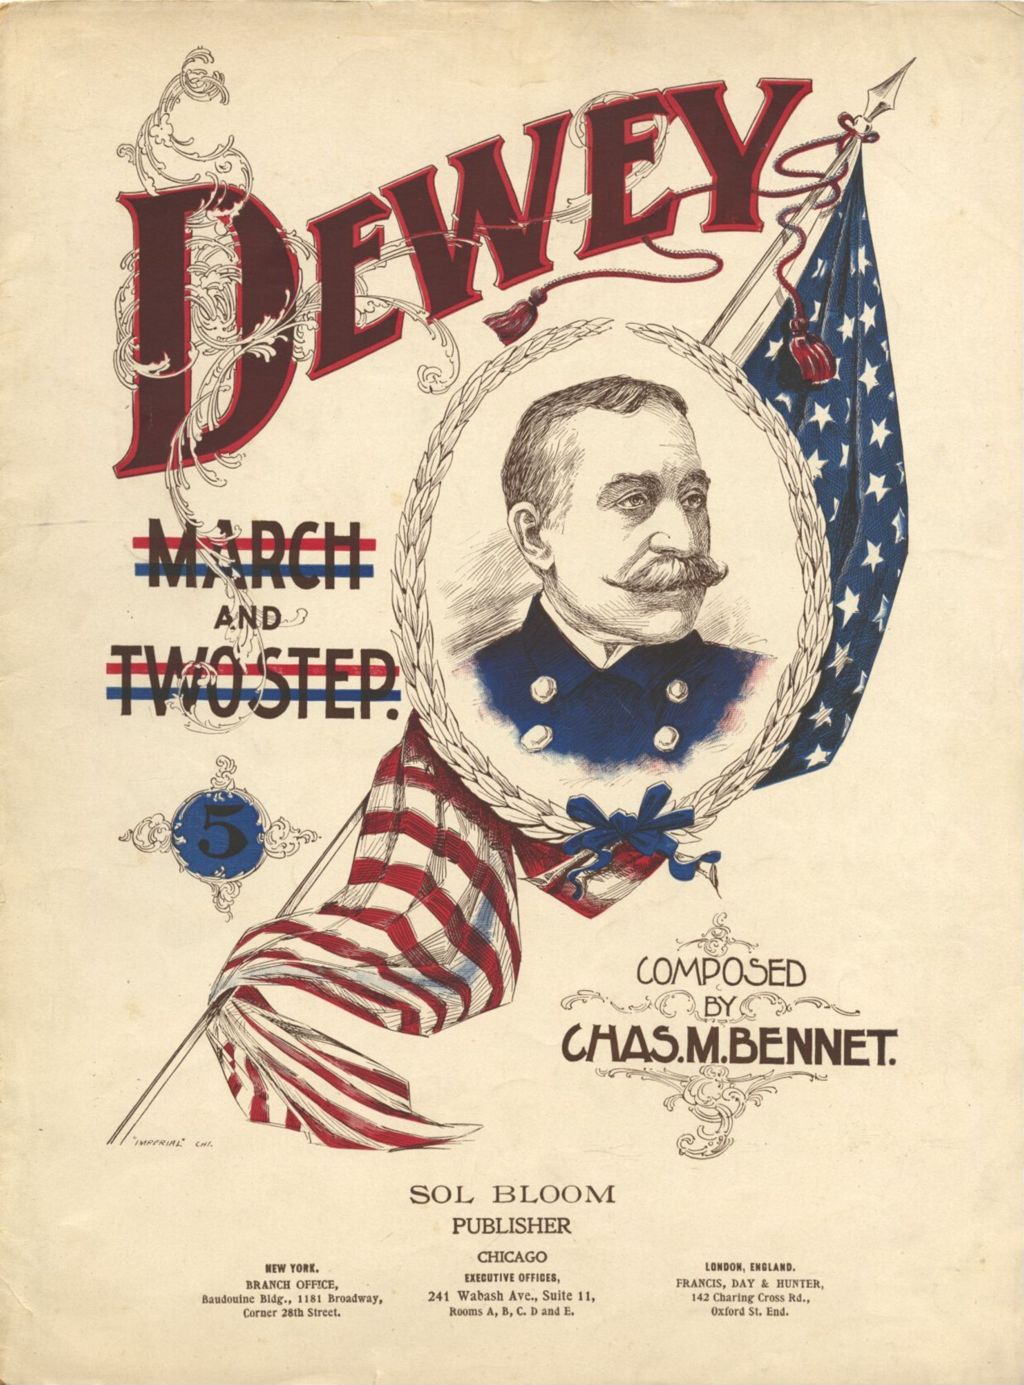 Dewey March and Two-Step